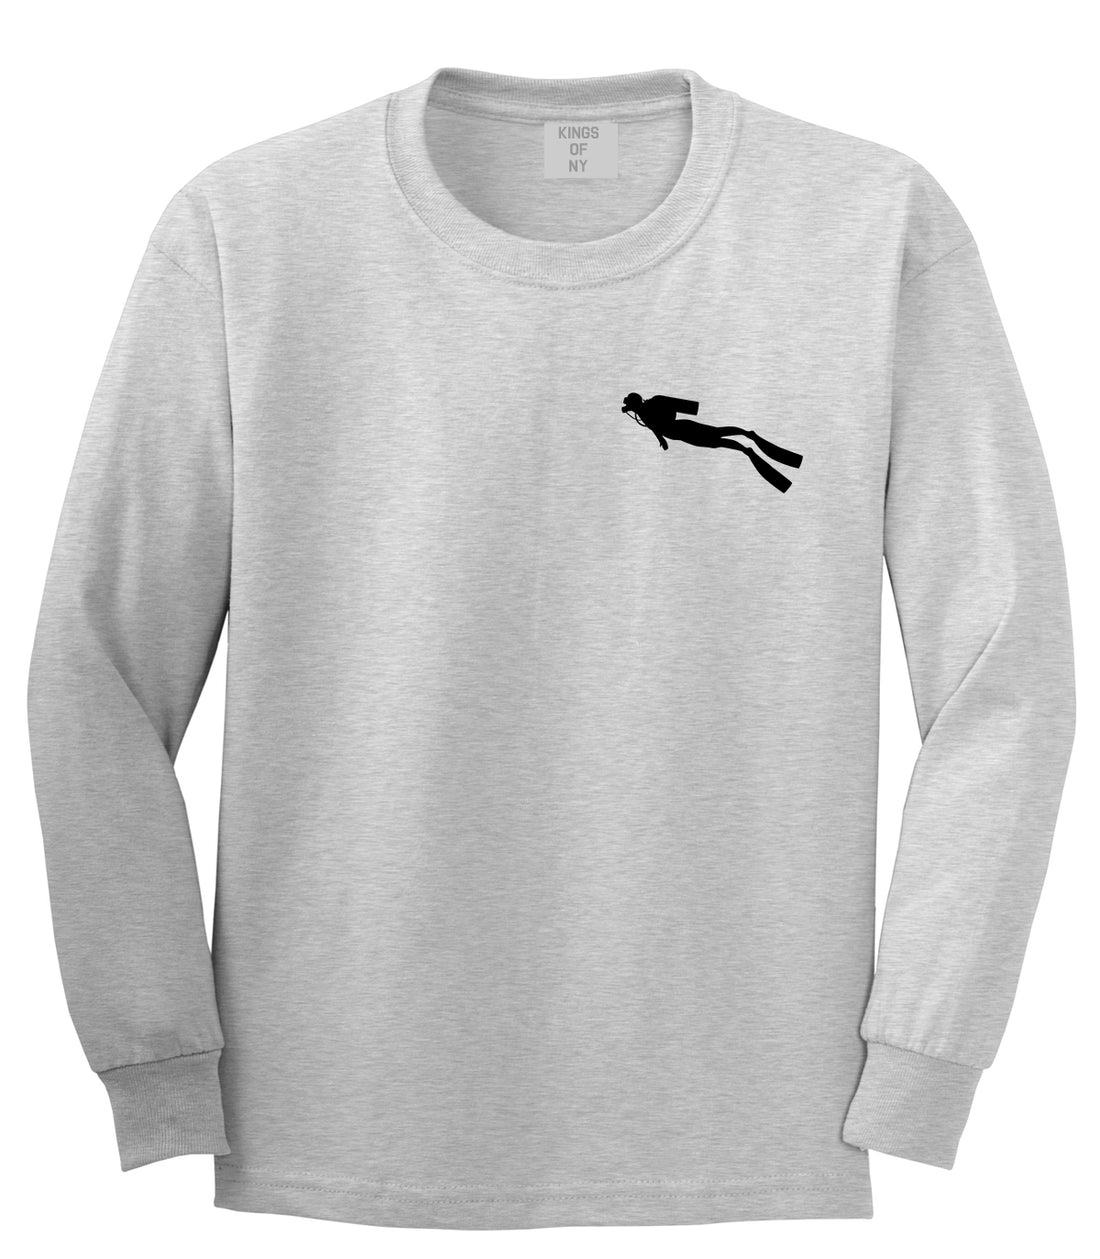 Scuba Diver Chest Mens Grey Long Sleeve T-Shirt by Kings Of NY